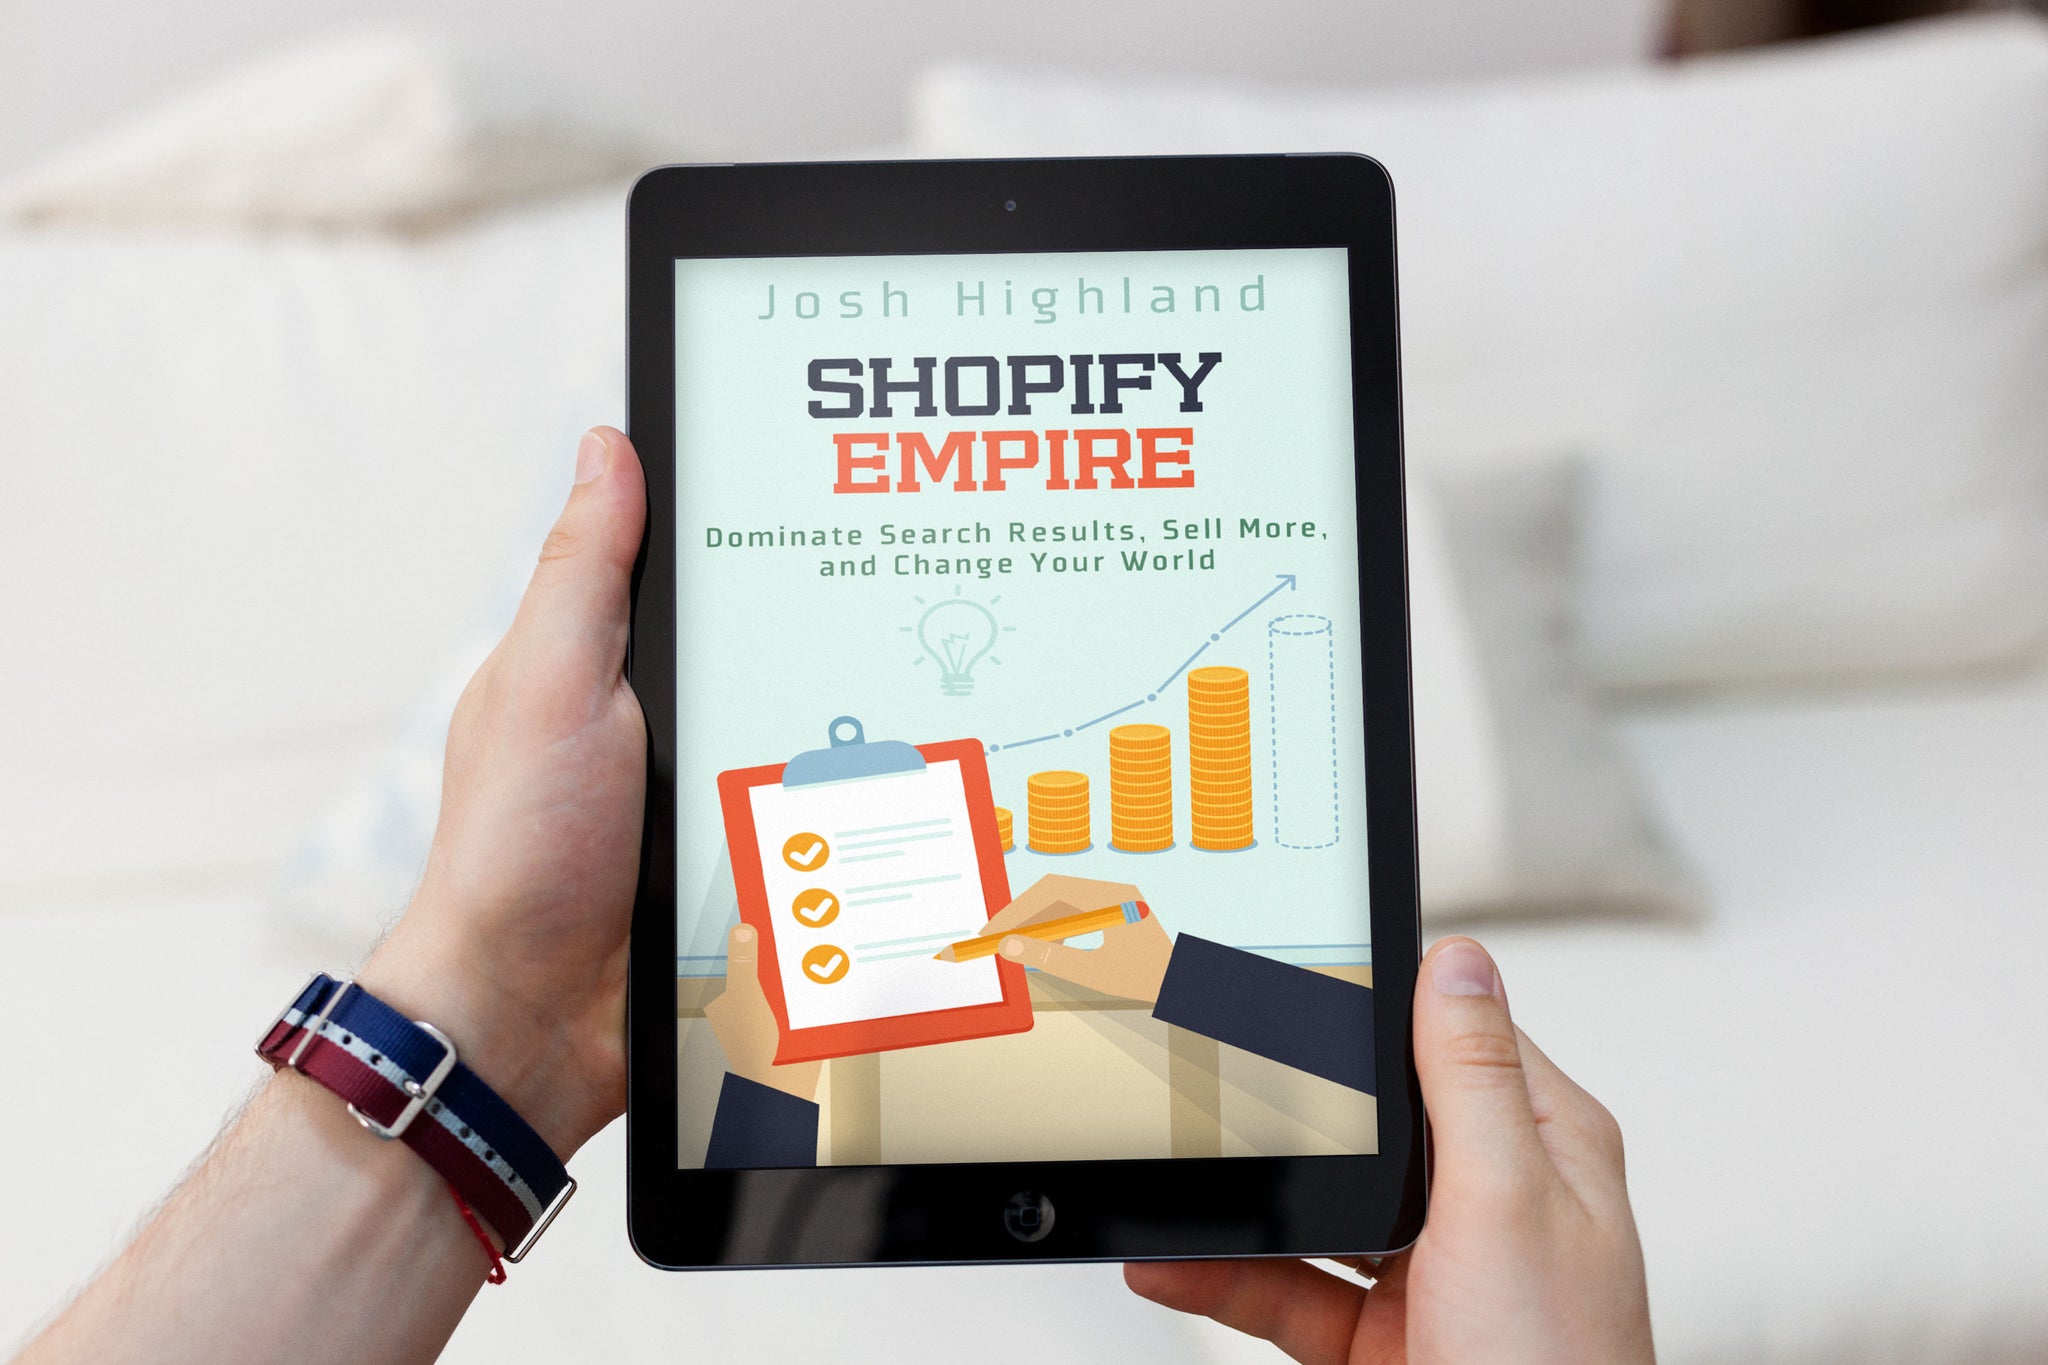 Free PDF sample for Shopify Empire